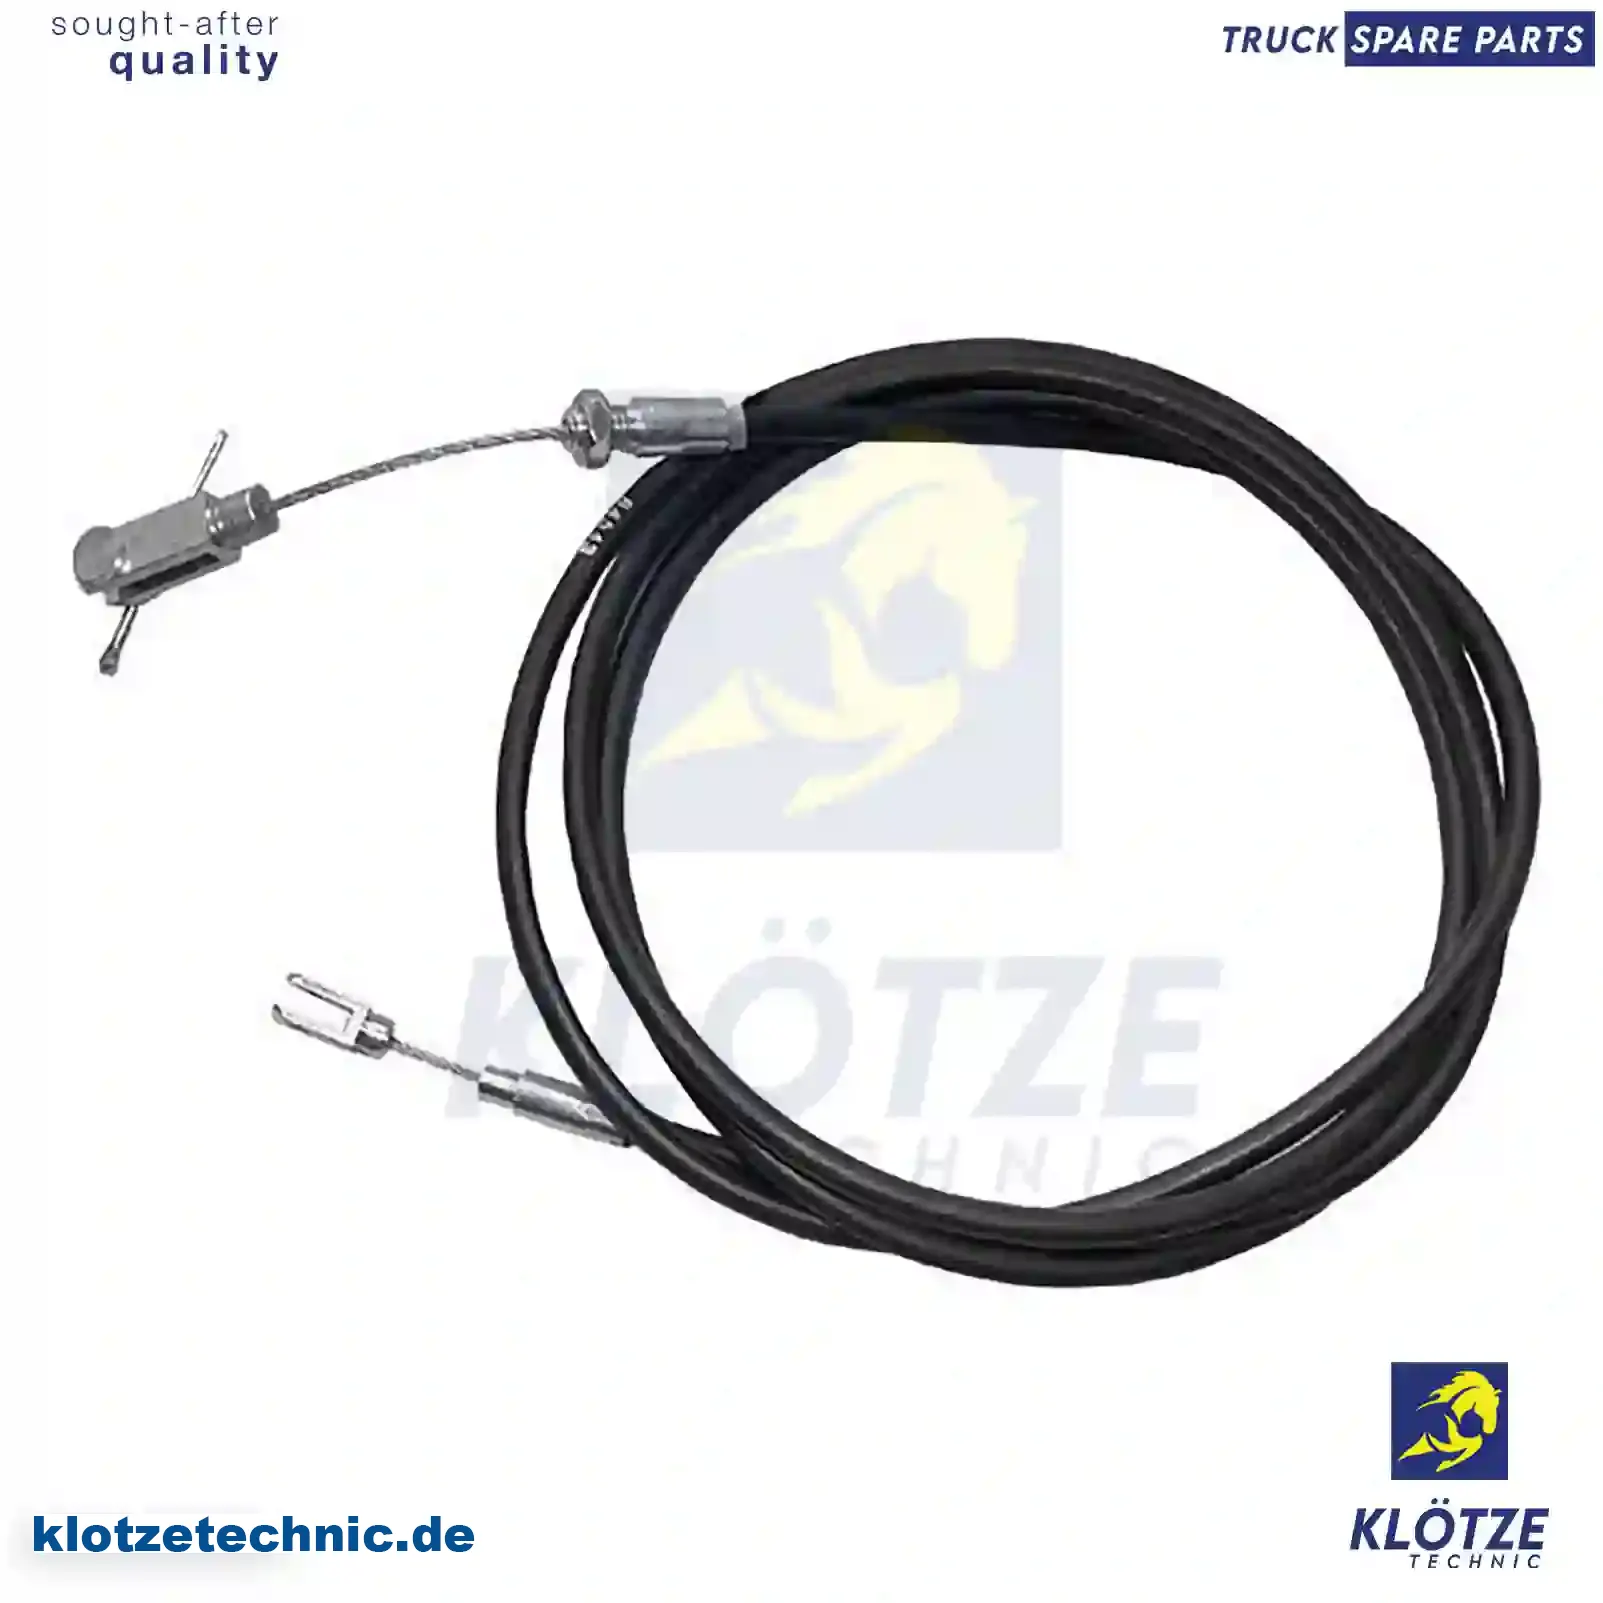 Control wire, front flap, 1384395